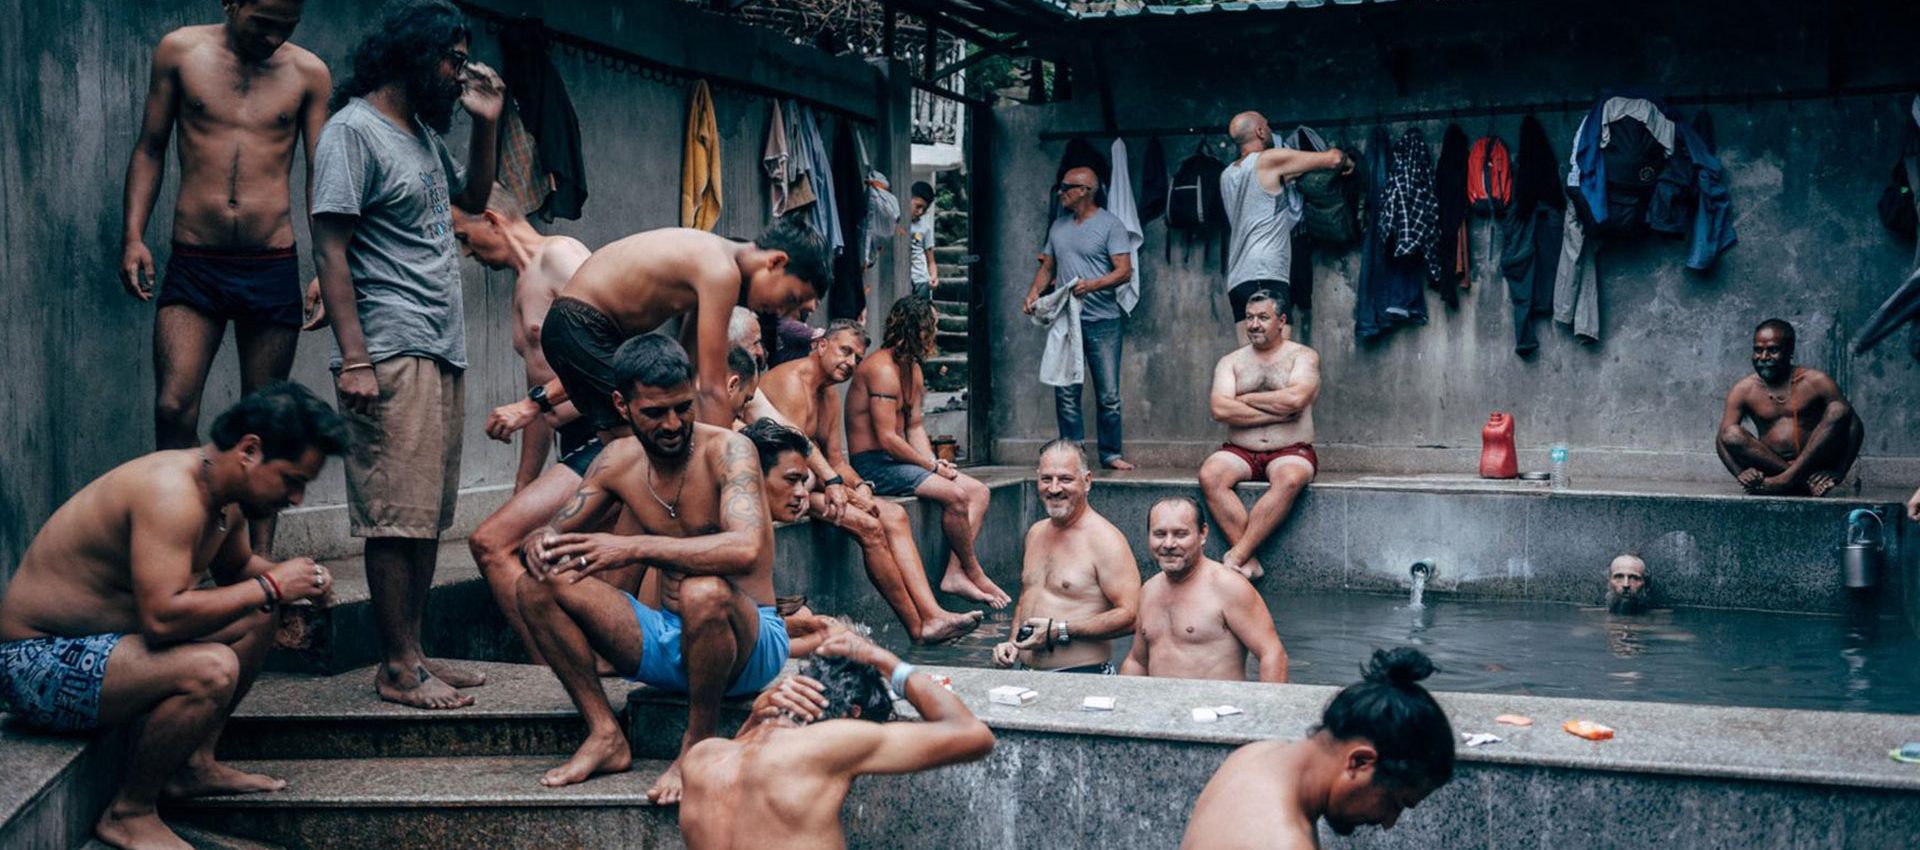 After a hard day of riding the group is relaxing in the public hot thermal bath of Manali while chatting with the locals.